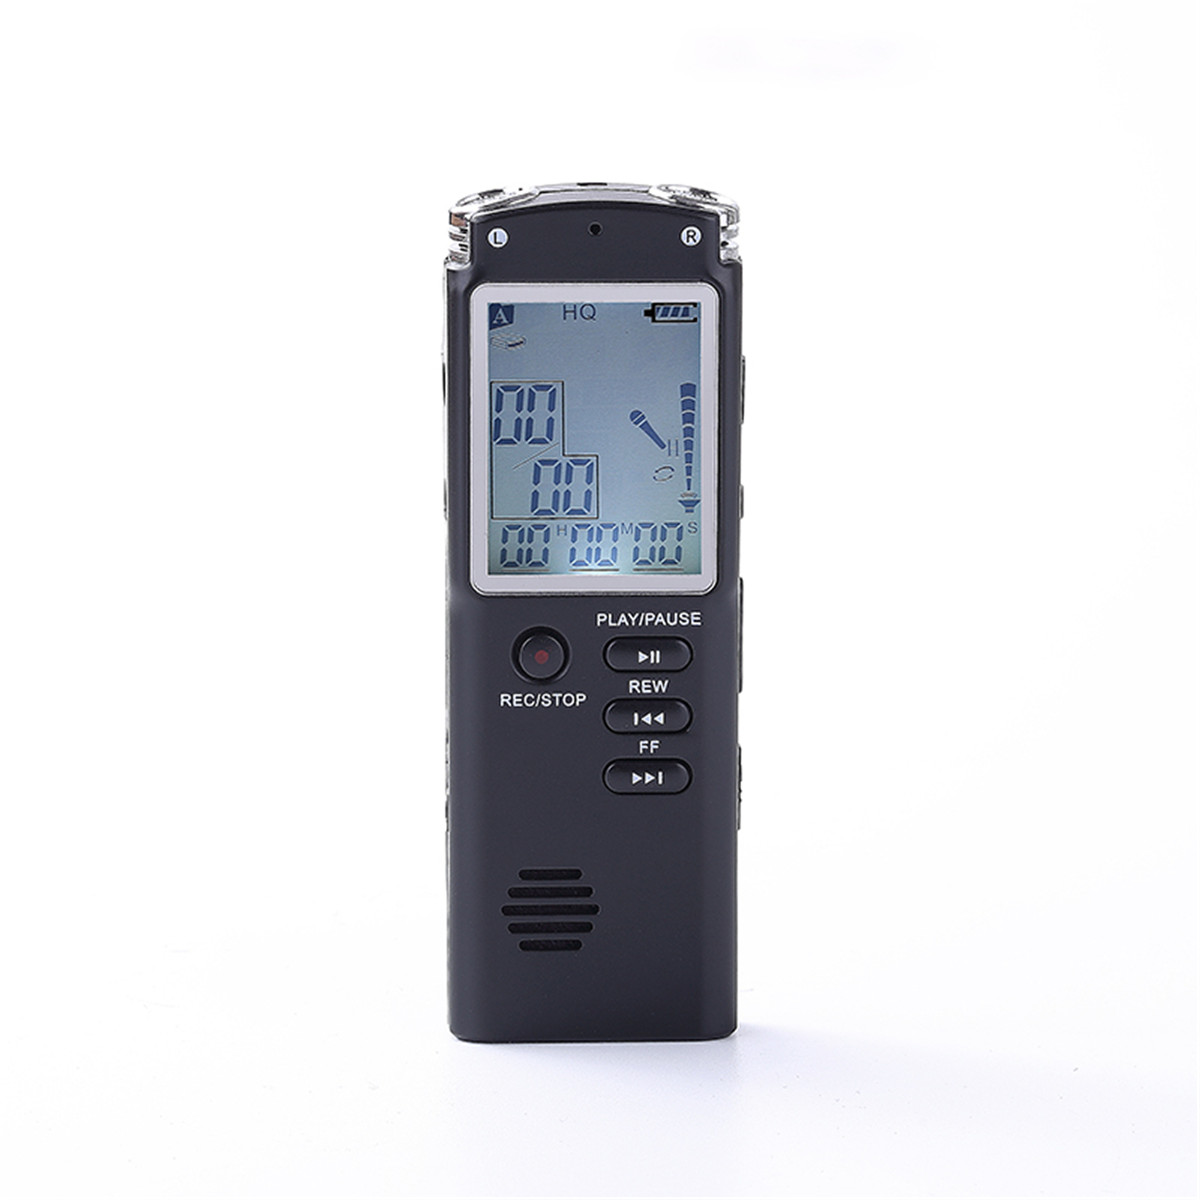 Digital-Voice-Recorder-81632GB-MP3-Lossless-Player-USB-Audio-Rechargeable-Mini-Dictaphone-1759537